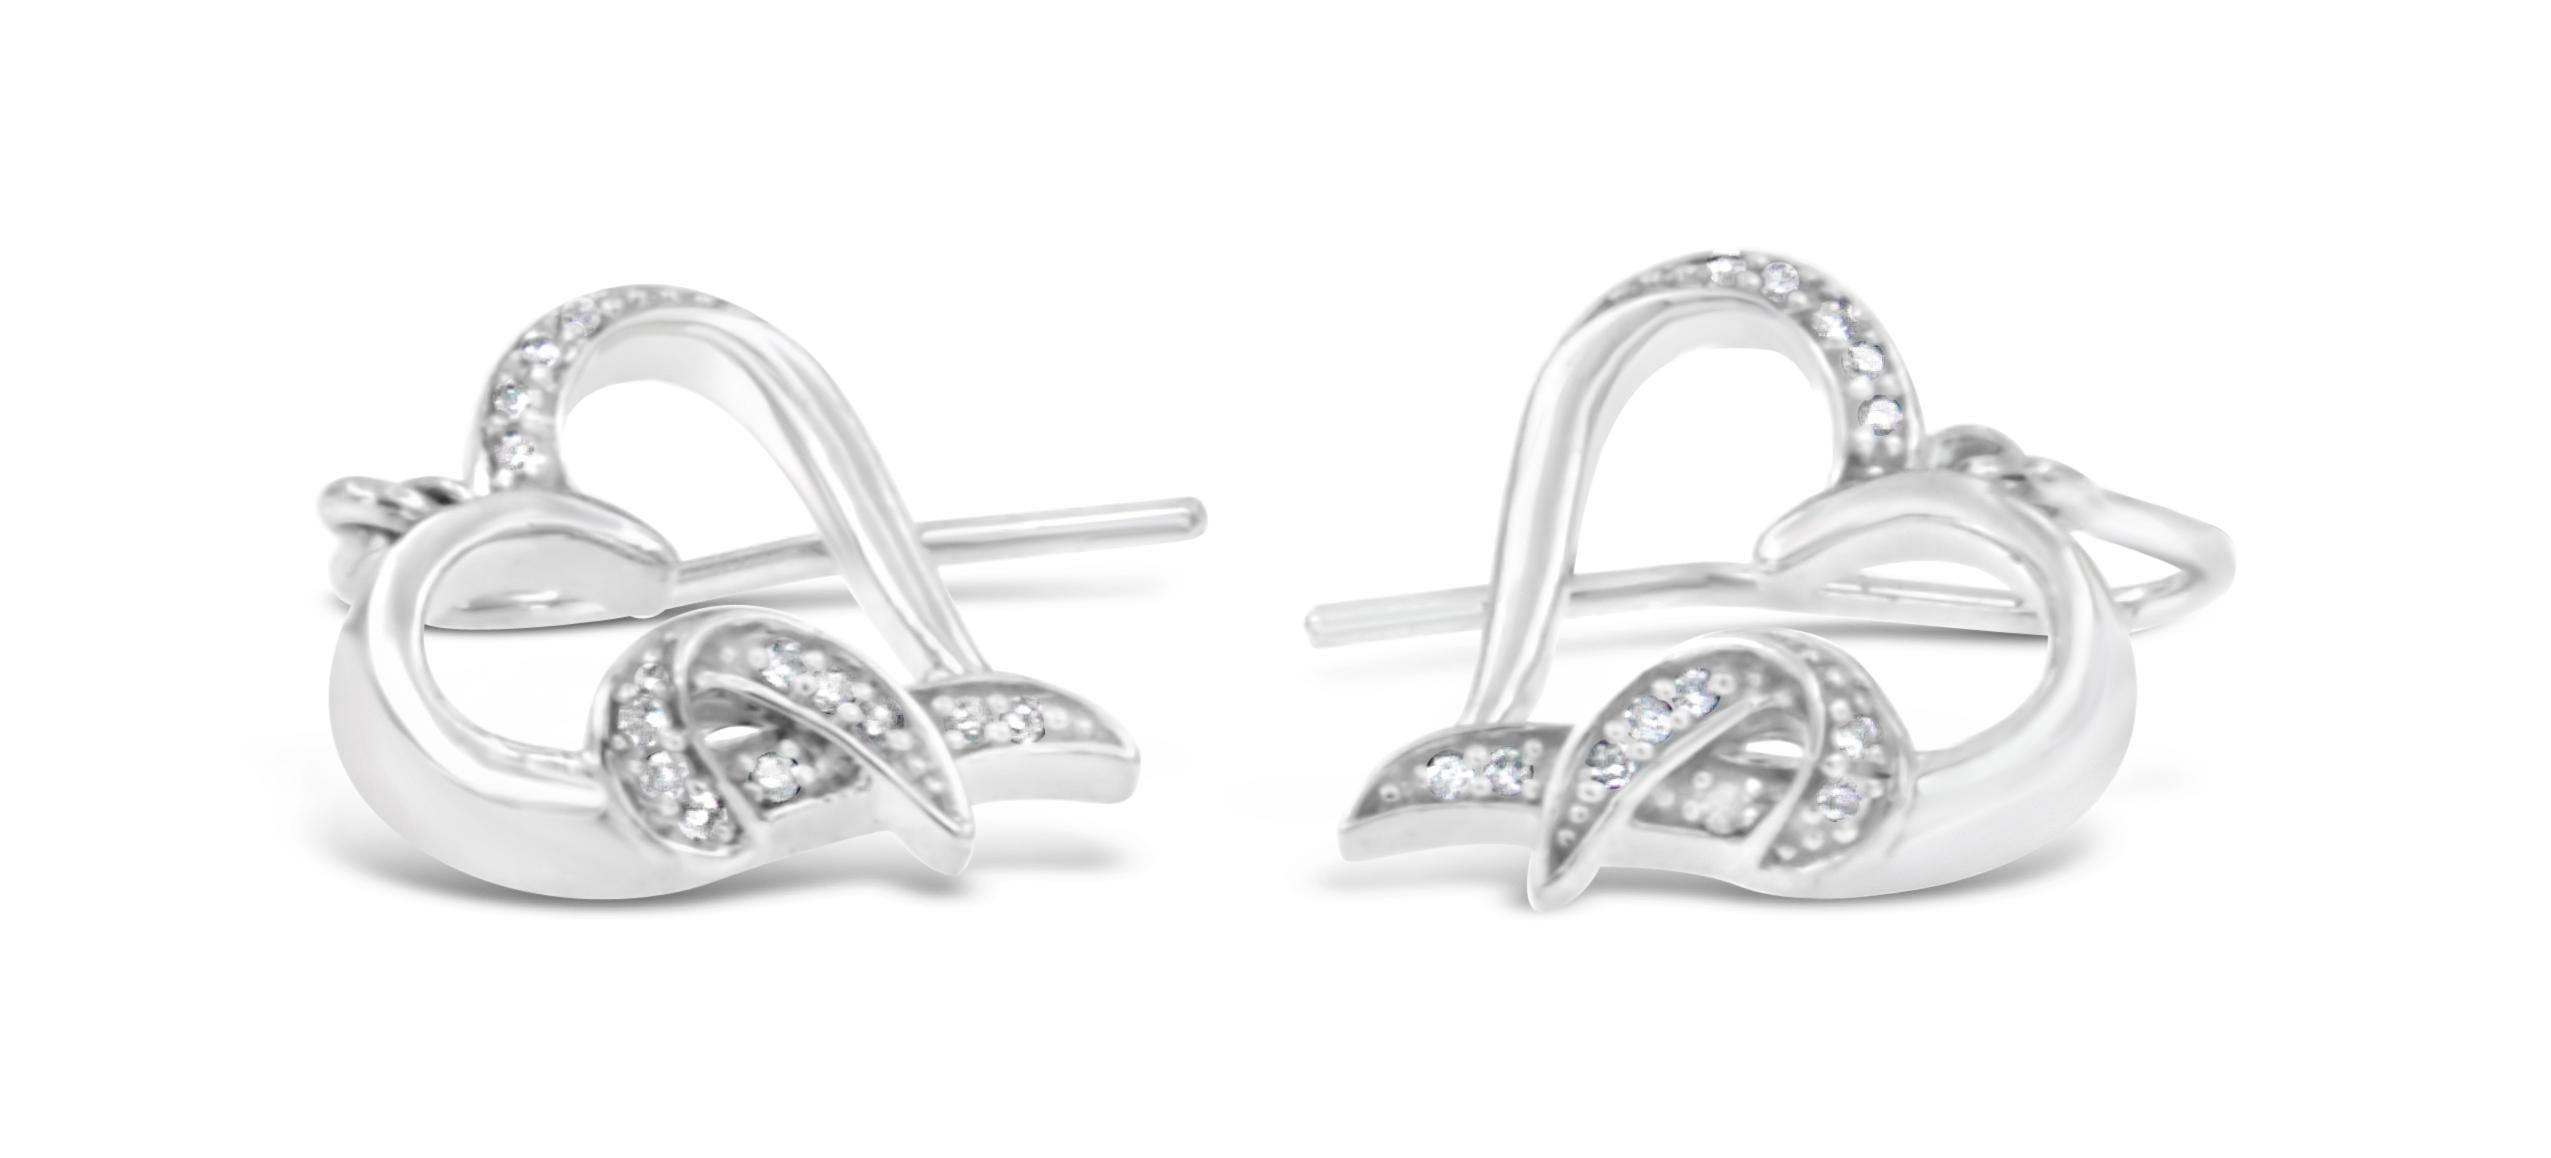 Representing the symbol of love, these heart shaped earrings are composed of high-quality sterling silver and buffed high to shine. The stunning jewel is embellished with sparkling round cut diamonds in a pave setting. The authentic earrings make a